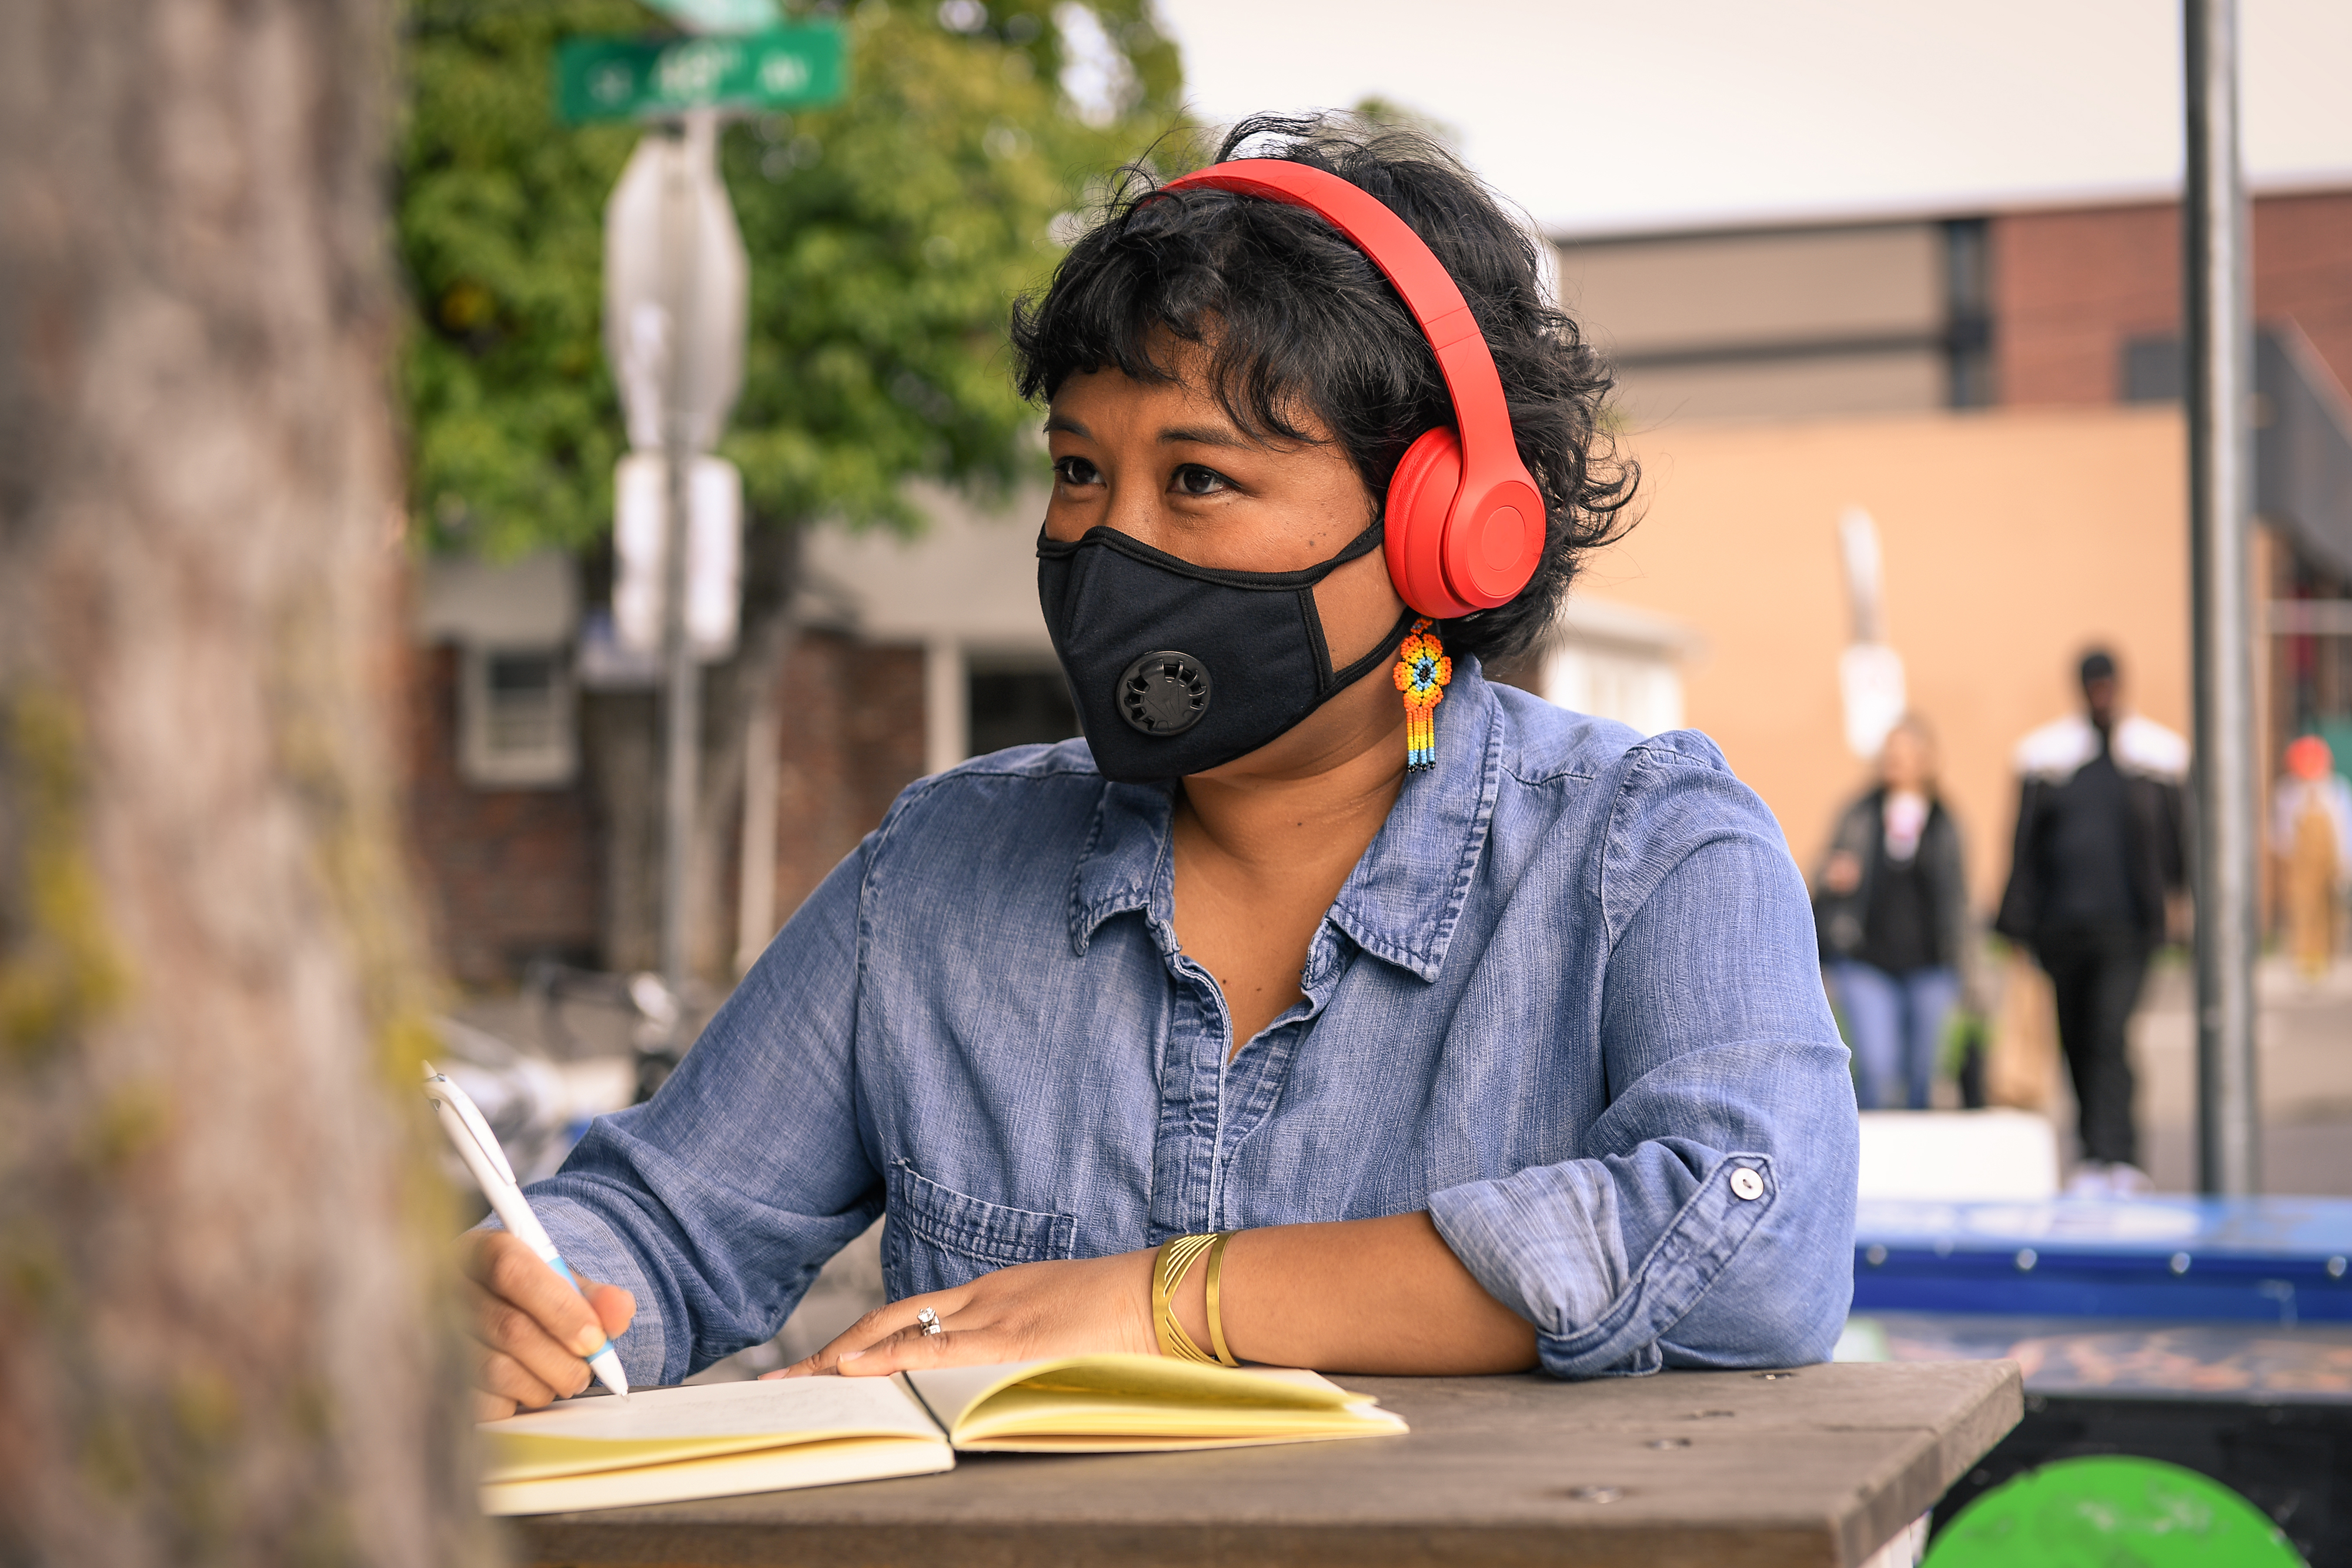 A Filipinx woman with a filtering face mask, sitting at a table with notebook and pen.